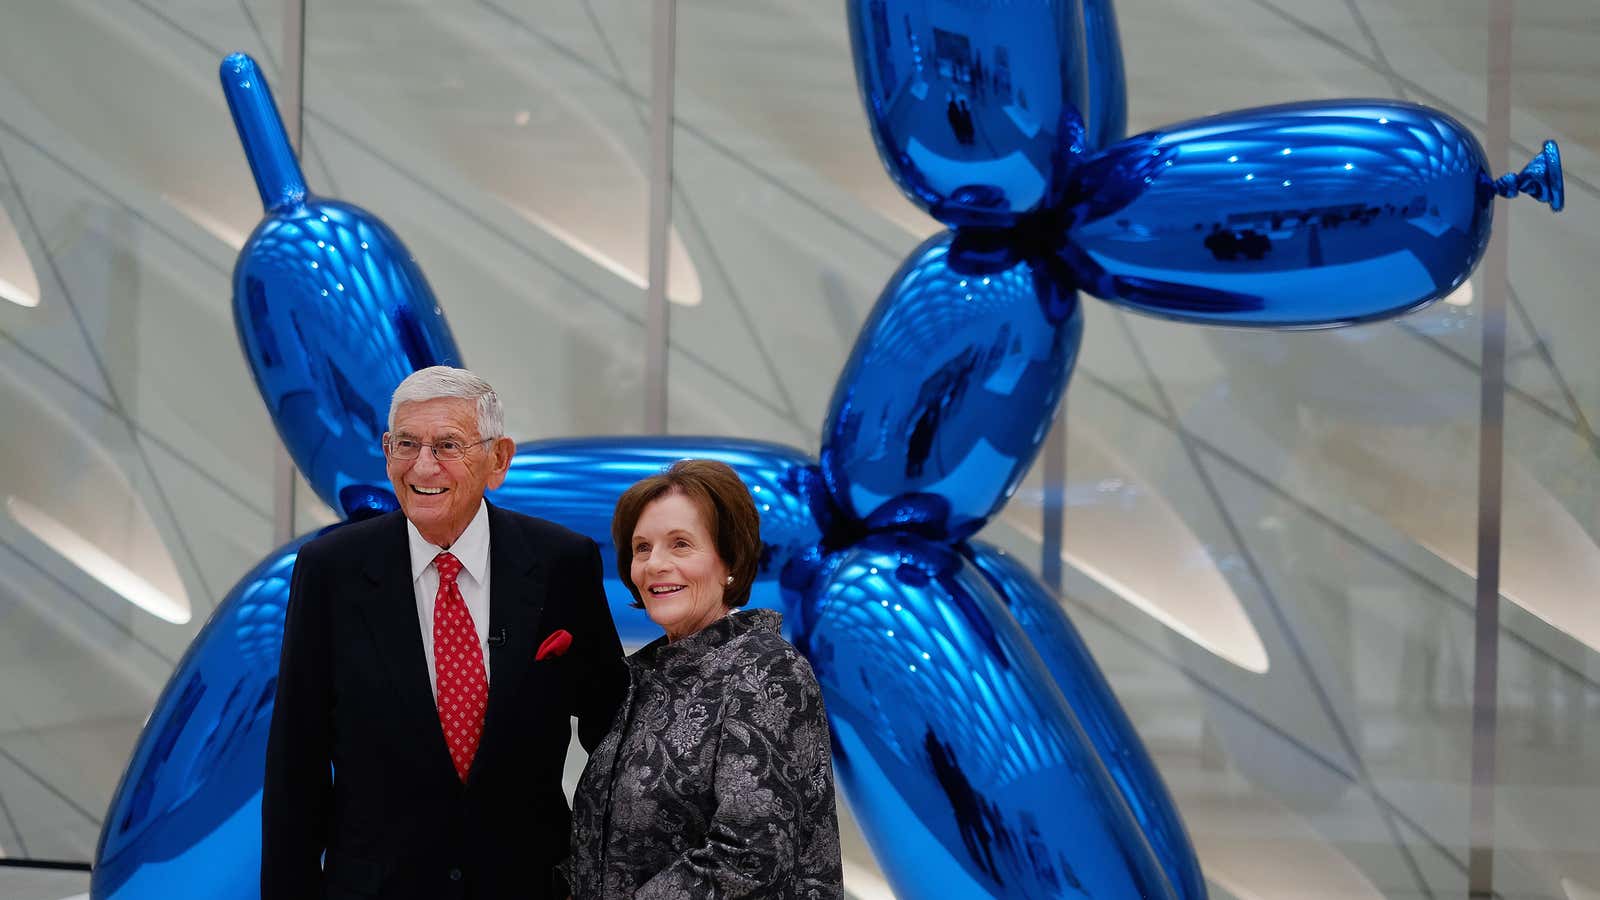 Eli Broad and his wife show off their shiny assets.